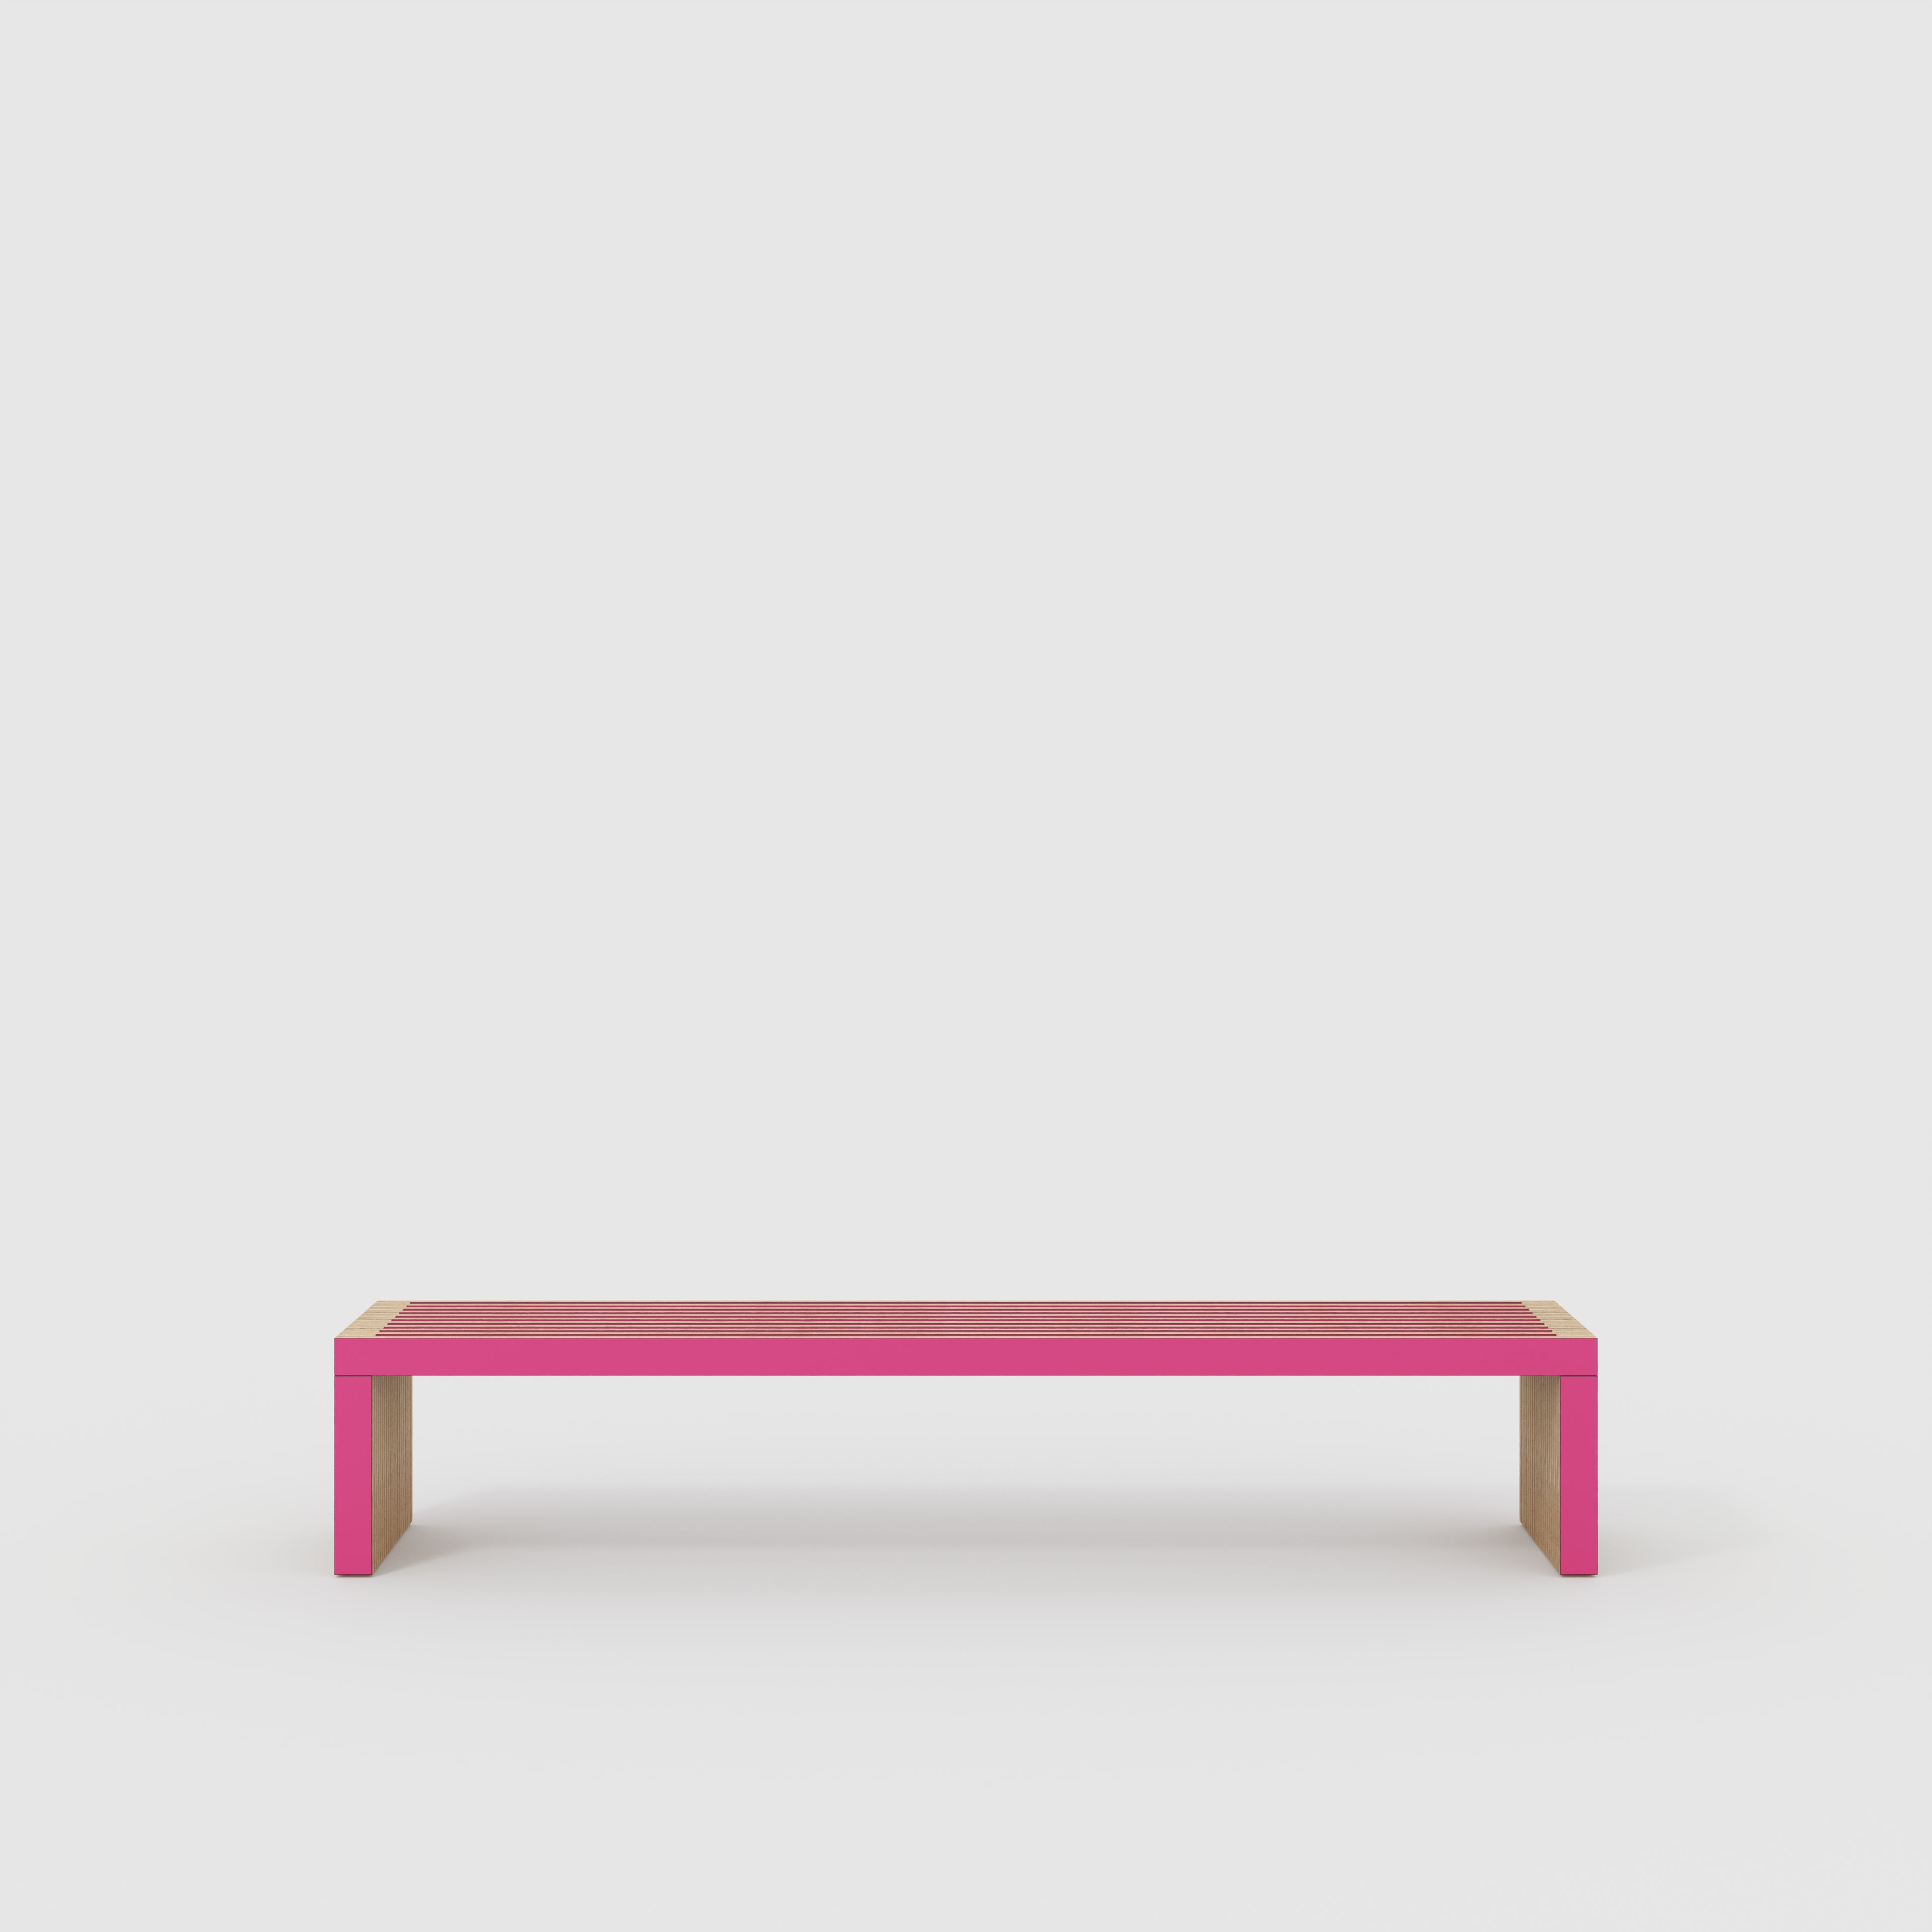 Bench Seat with Slats - Formica Juicy Pink - 2400(w) x 410(d) x 450(h)